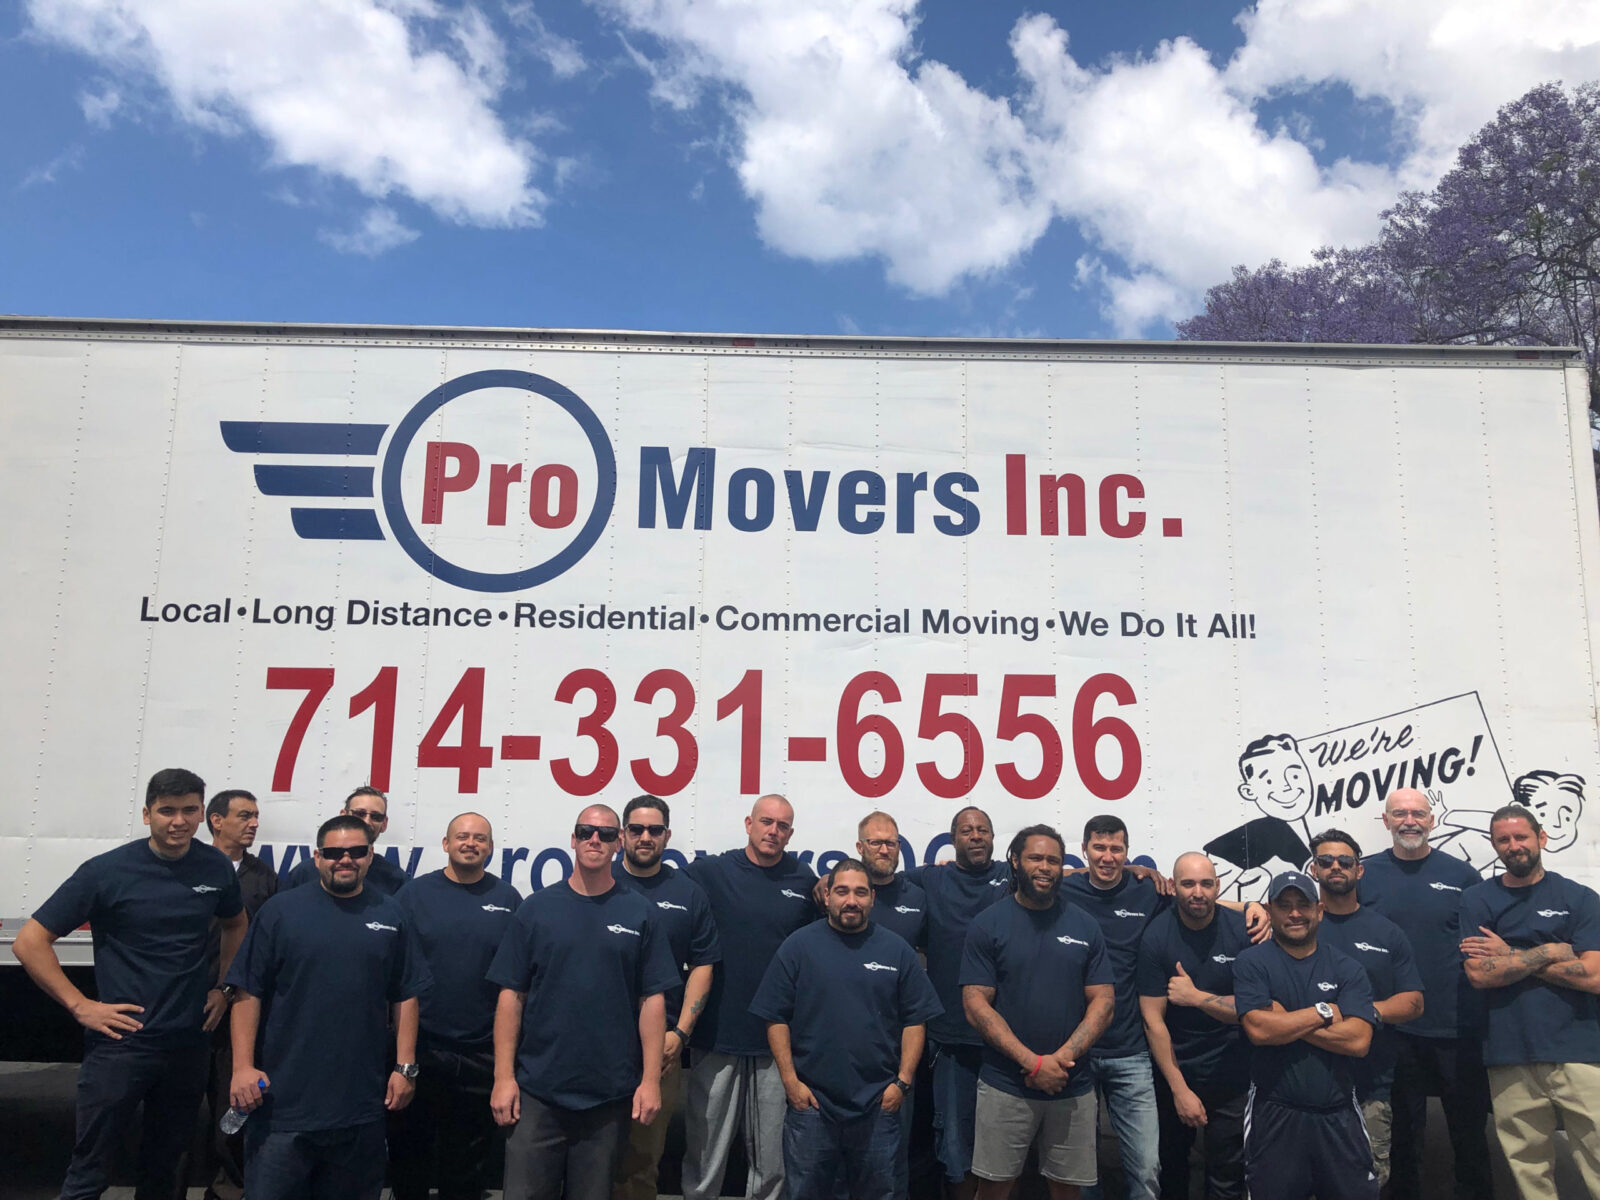 This is our team of certified movers in Laguna Beach.